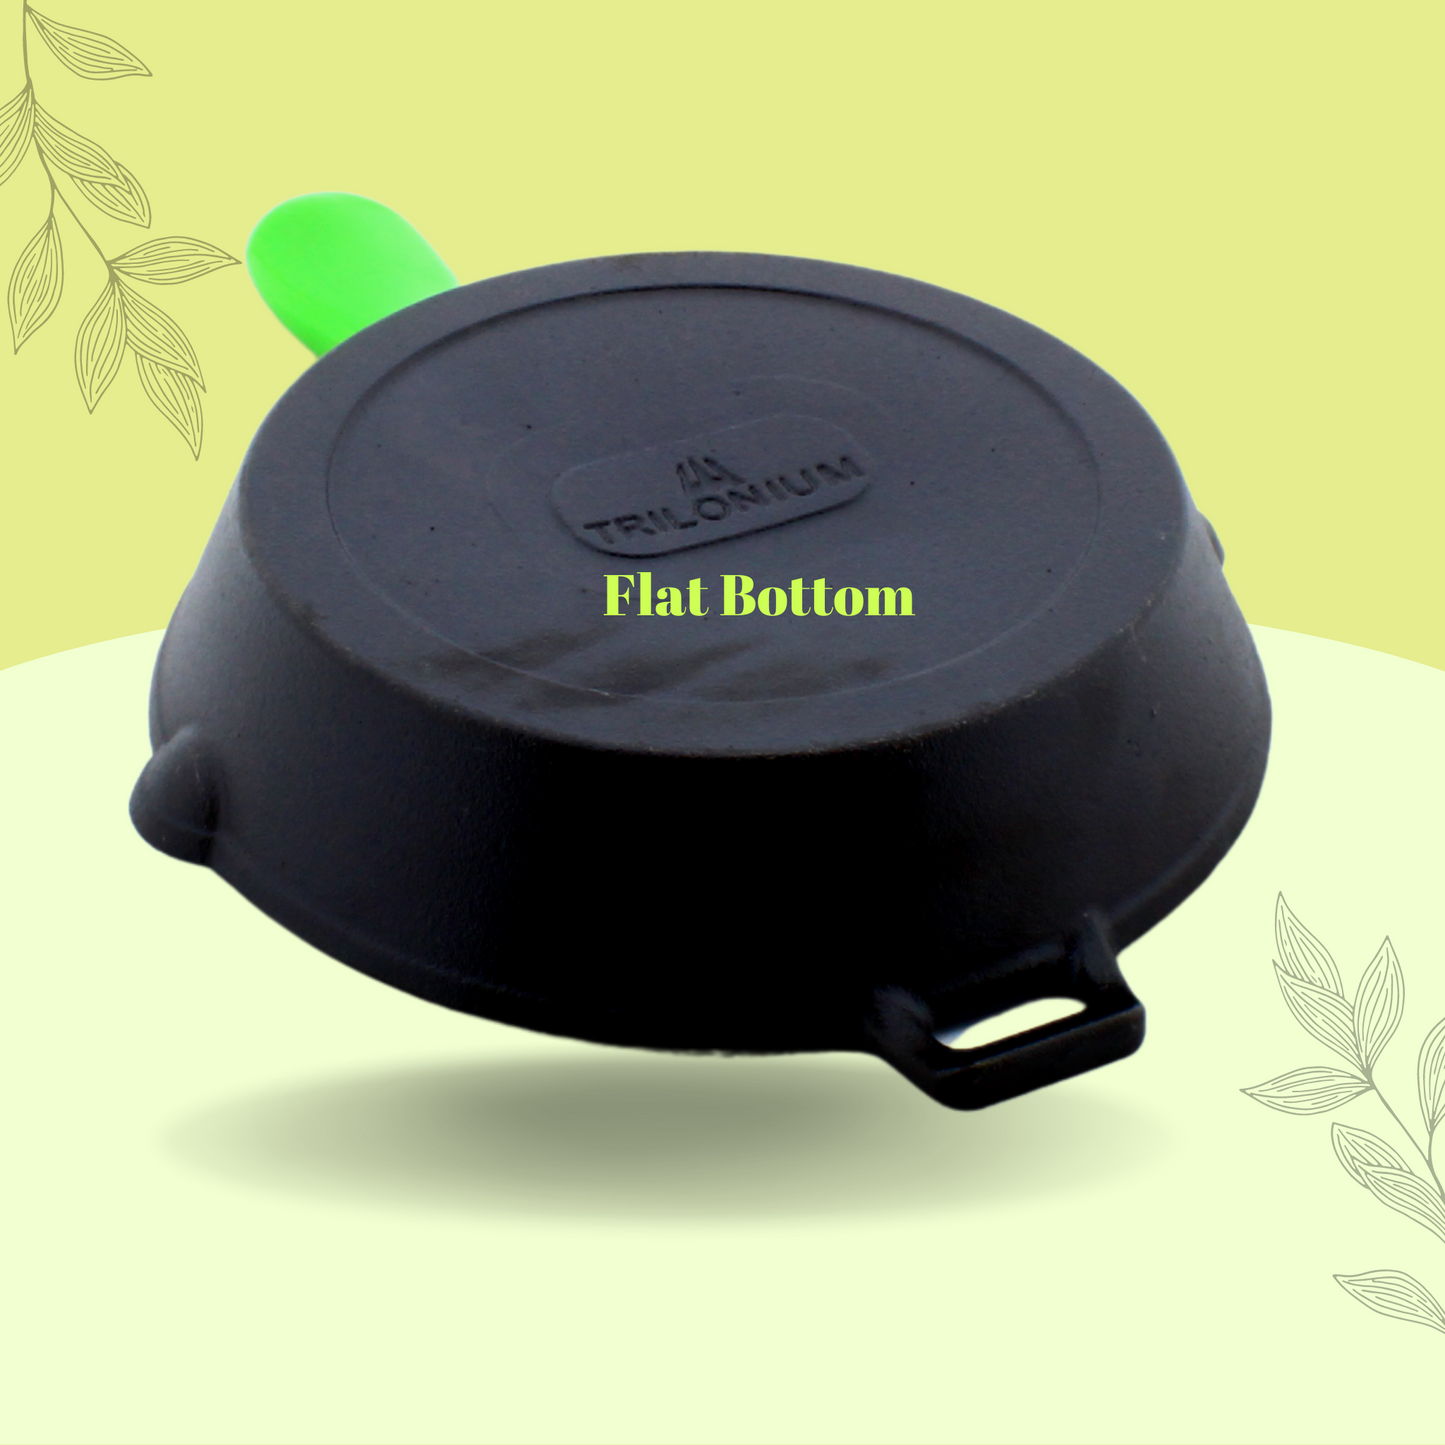 Cast Iron Skillet | Fry Pan | Pre-Seasoned | 10 inches | 2 Kgs | Induction Compatible | Free Silicone Heat Proof Sleeve Grip for hot handles